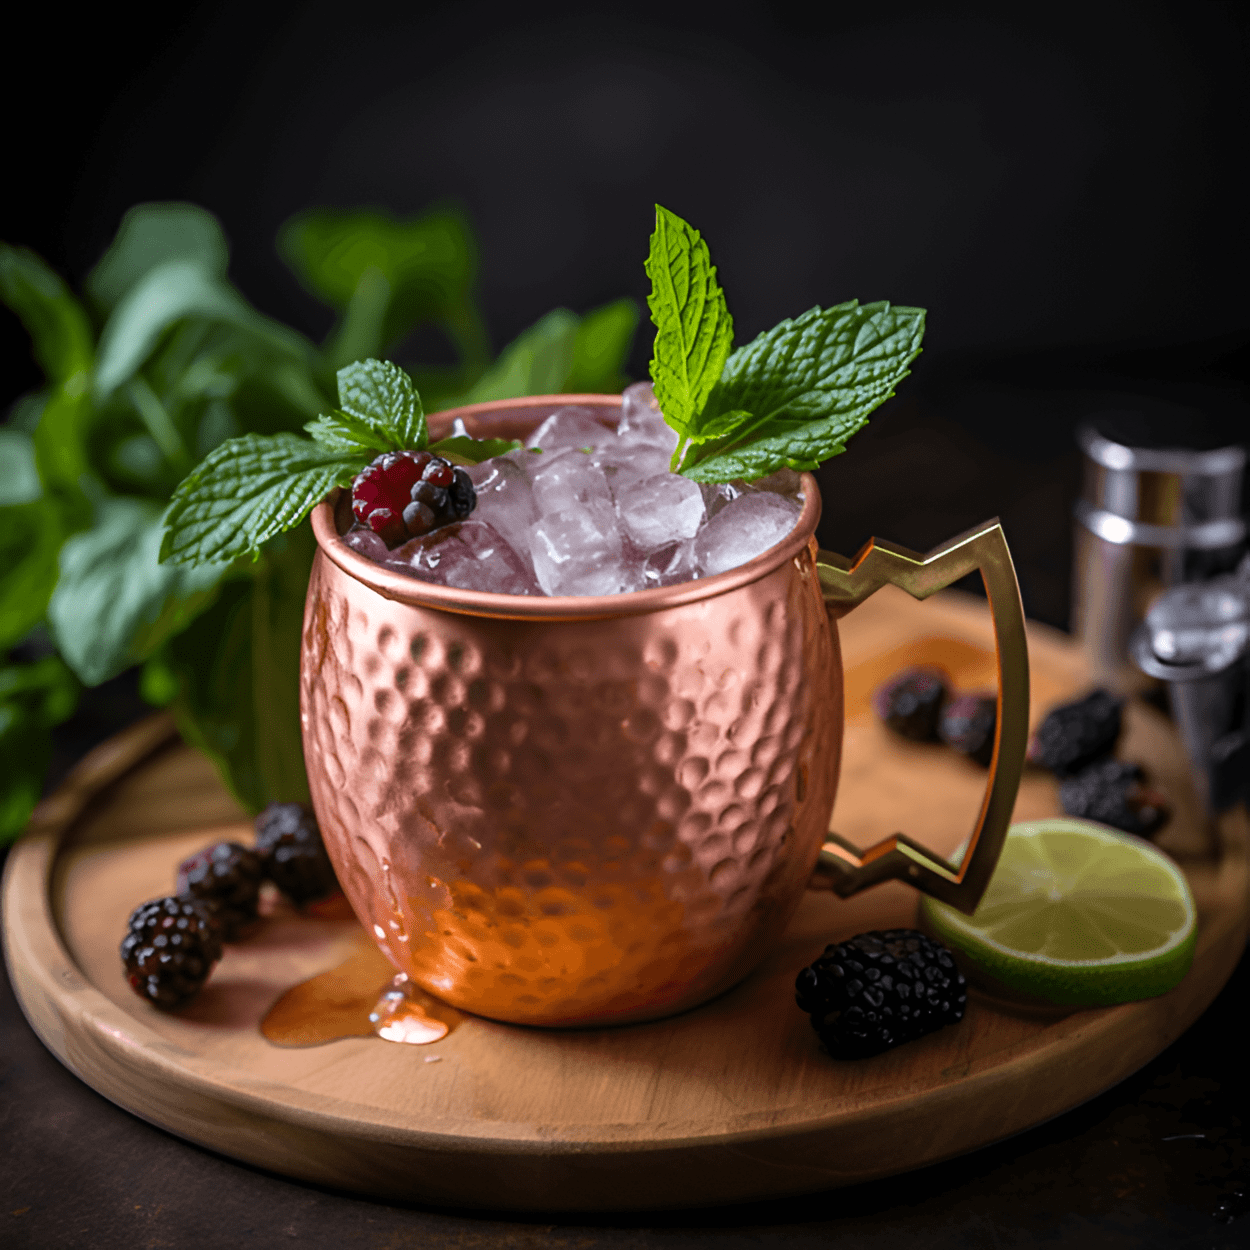 Blackberry Sage Mule Cocktail Recipe - The Blackberry Sage Mule offers a delightful balance of sweet, tart, and earthy flavors. The blackberries provide a sweet and slightly tart taste, while the sage adds an earthy complexity. The ginger beer gives it a spicy kick, and the lime juice adds a refreshing tanginess.